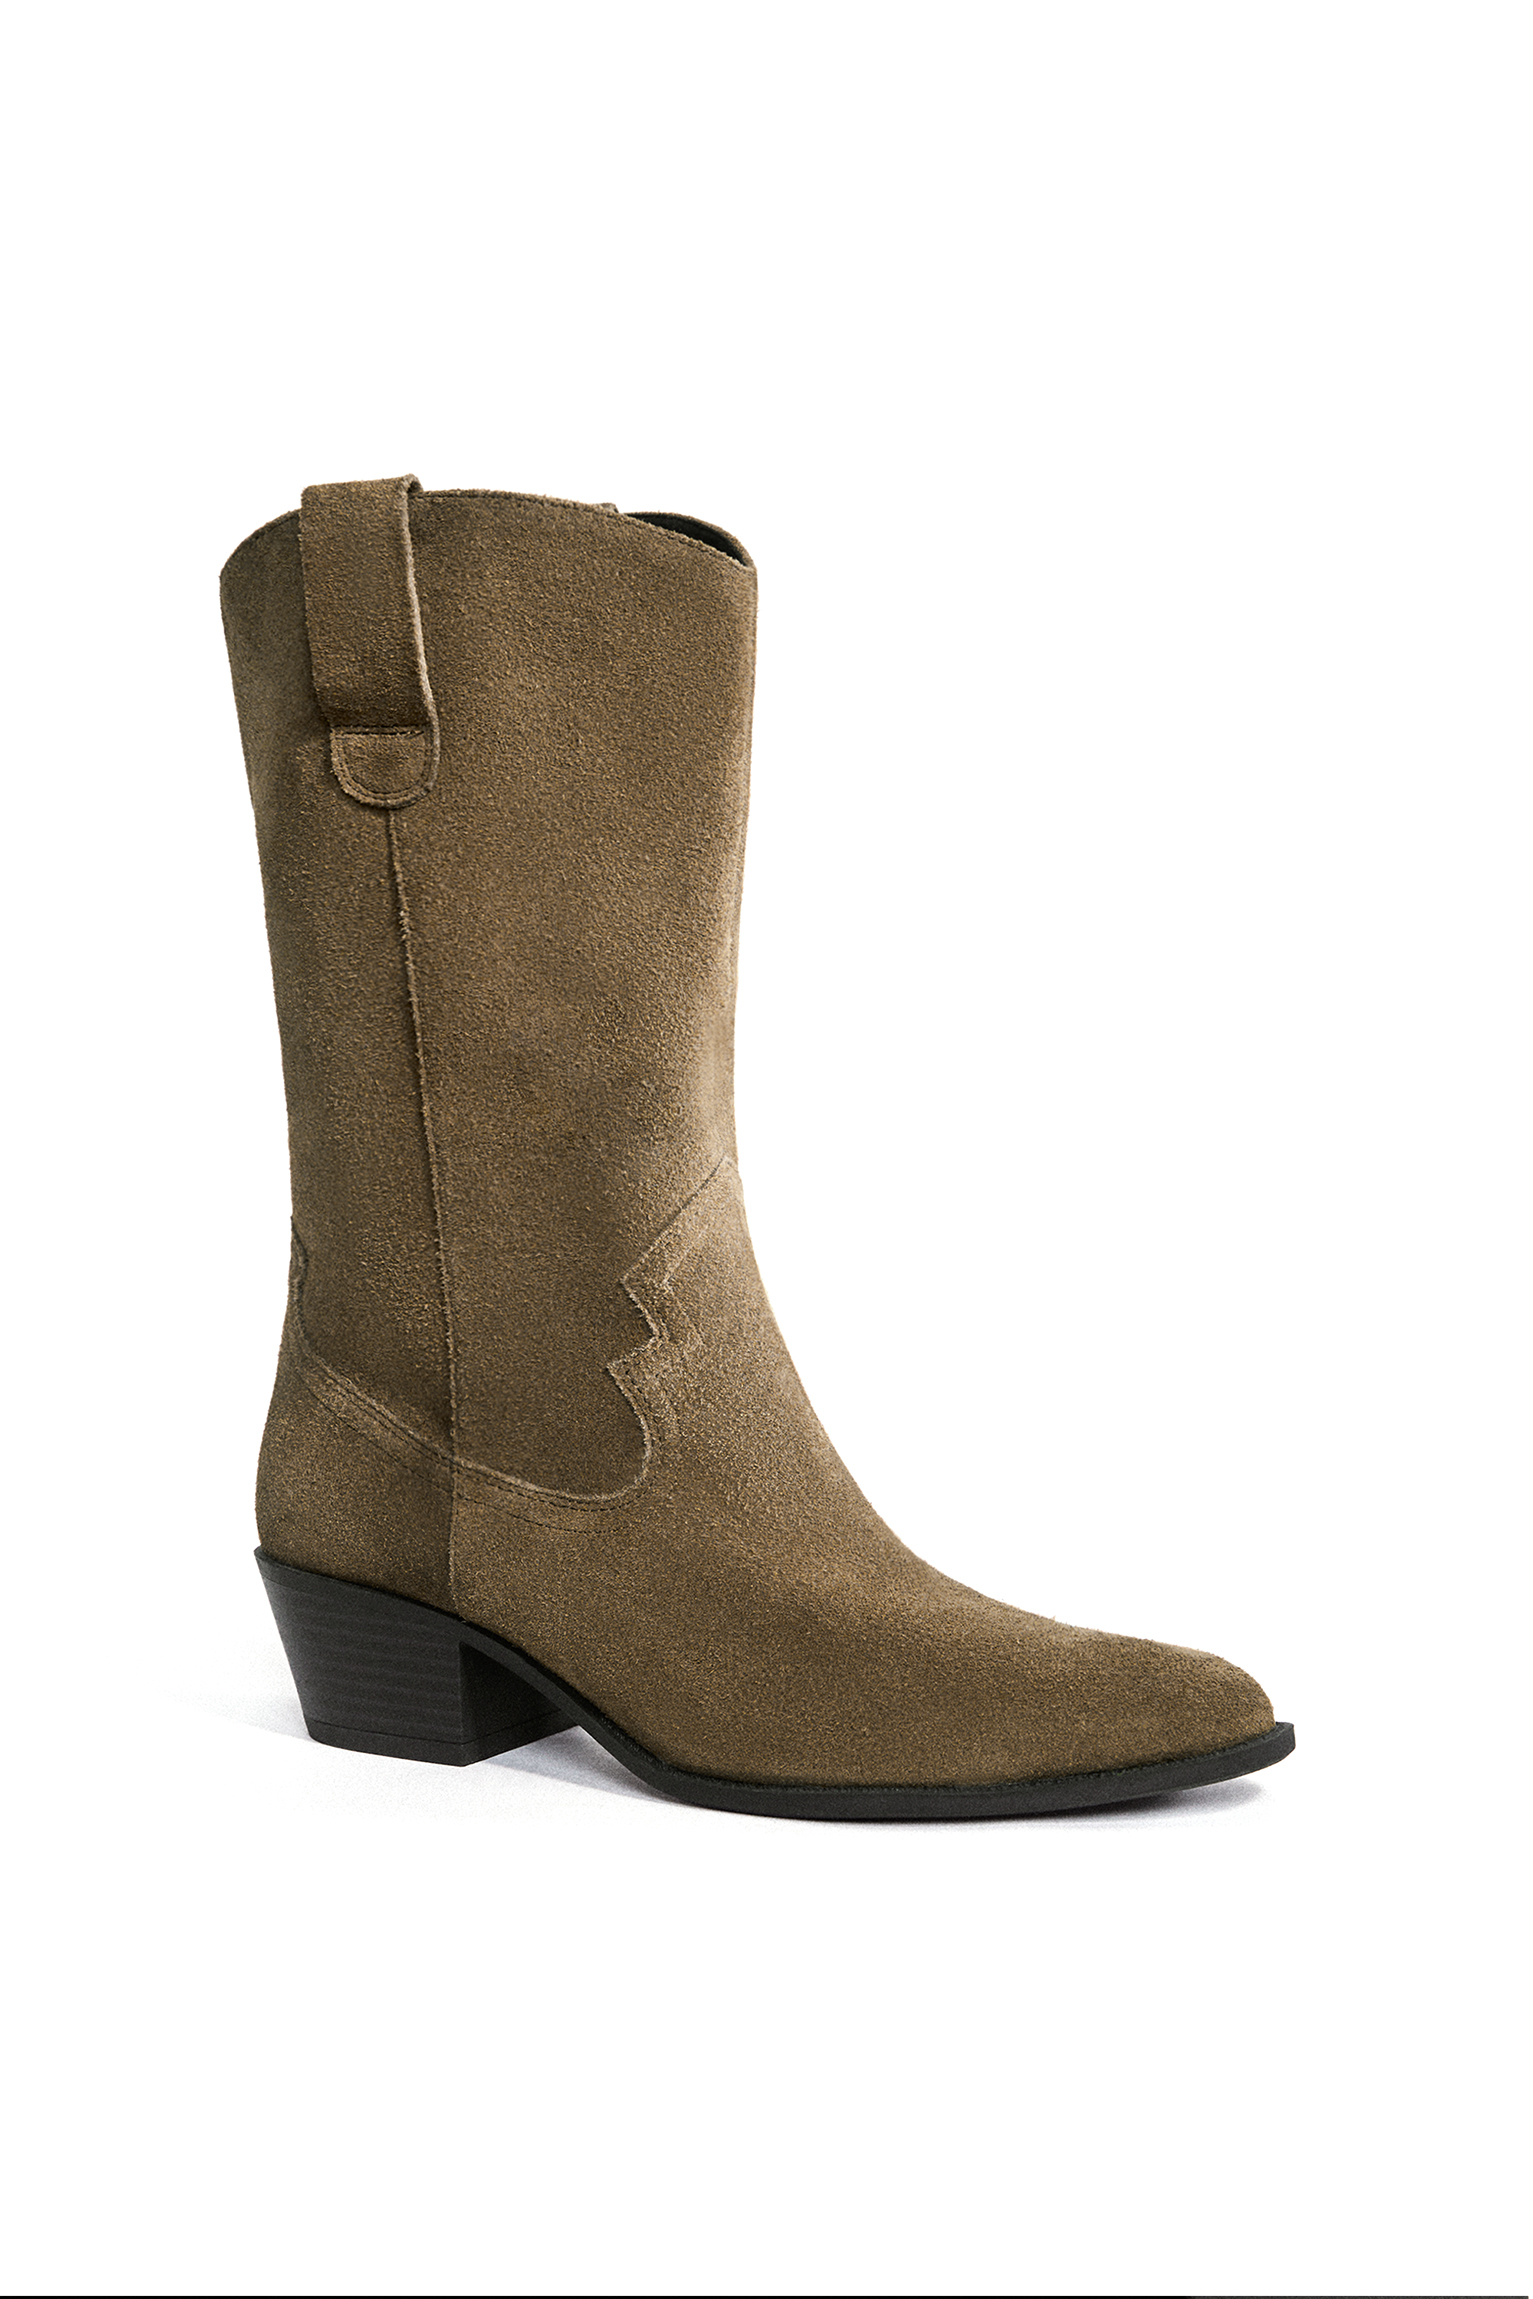 Boots & ankle boots - Shoes - Woman - PULL&BEAR Morocco